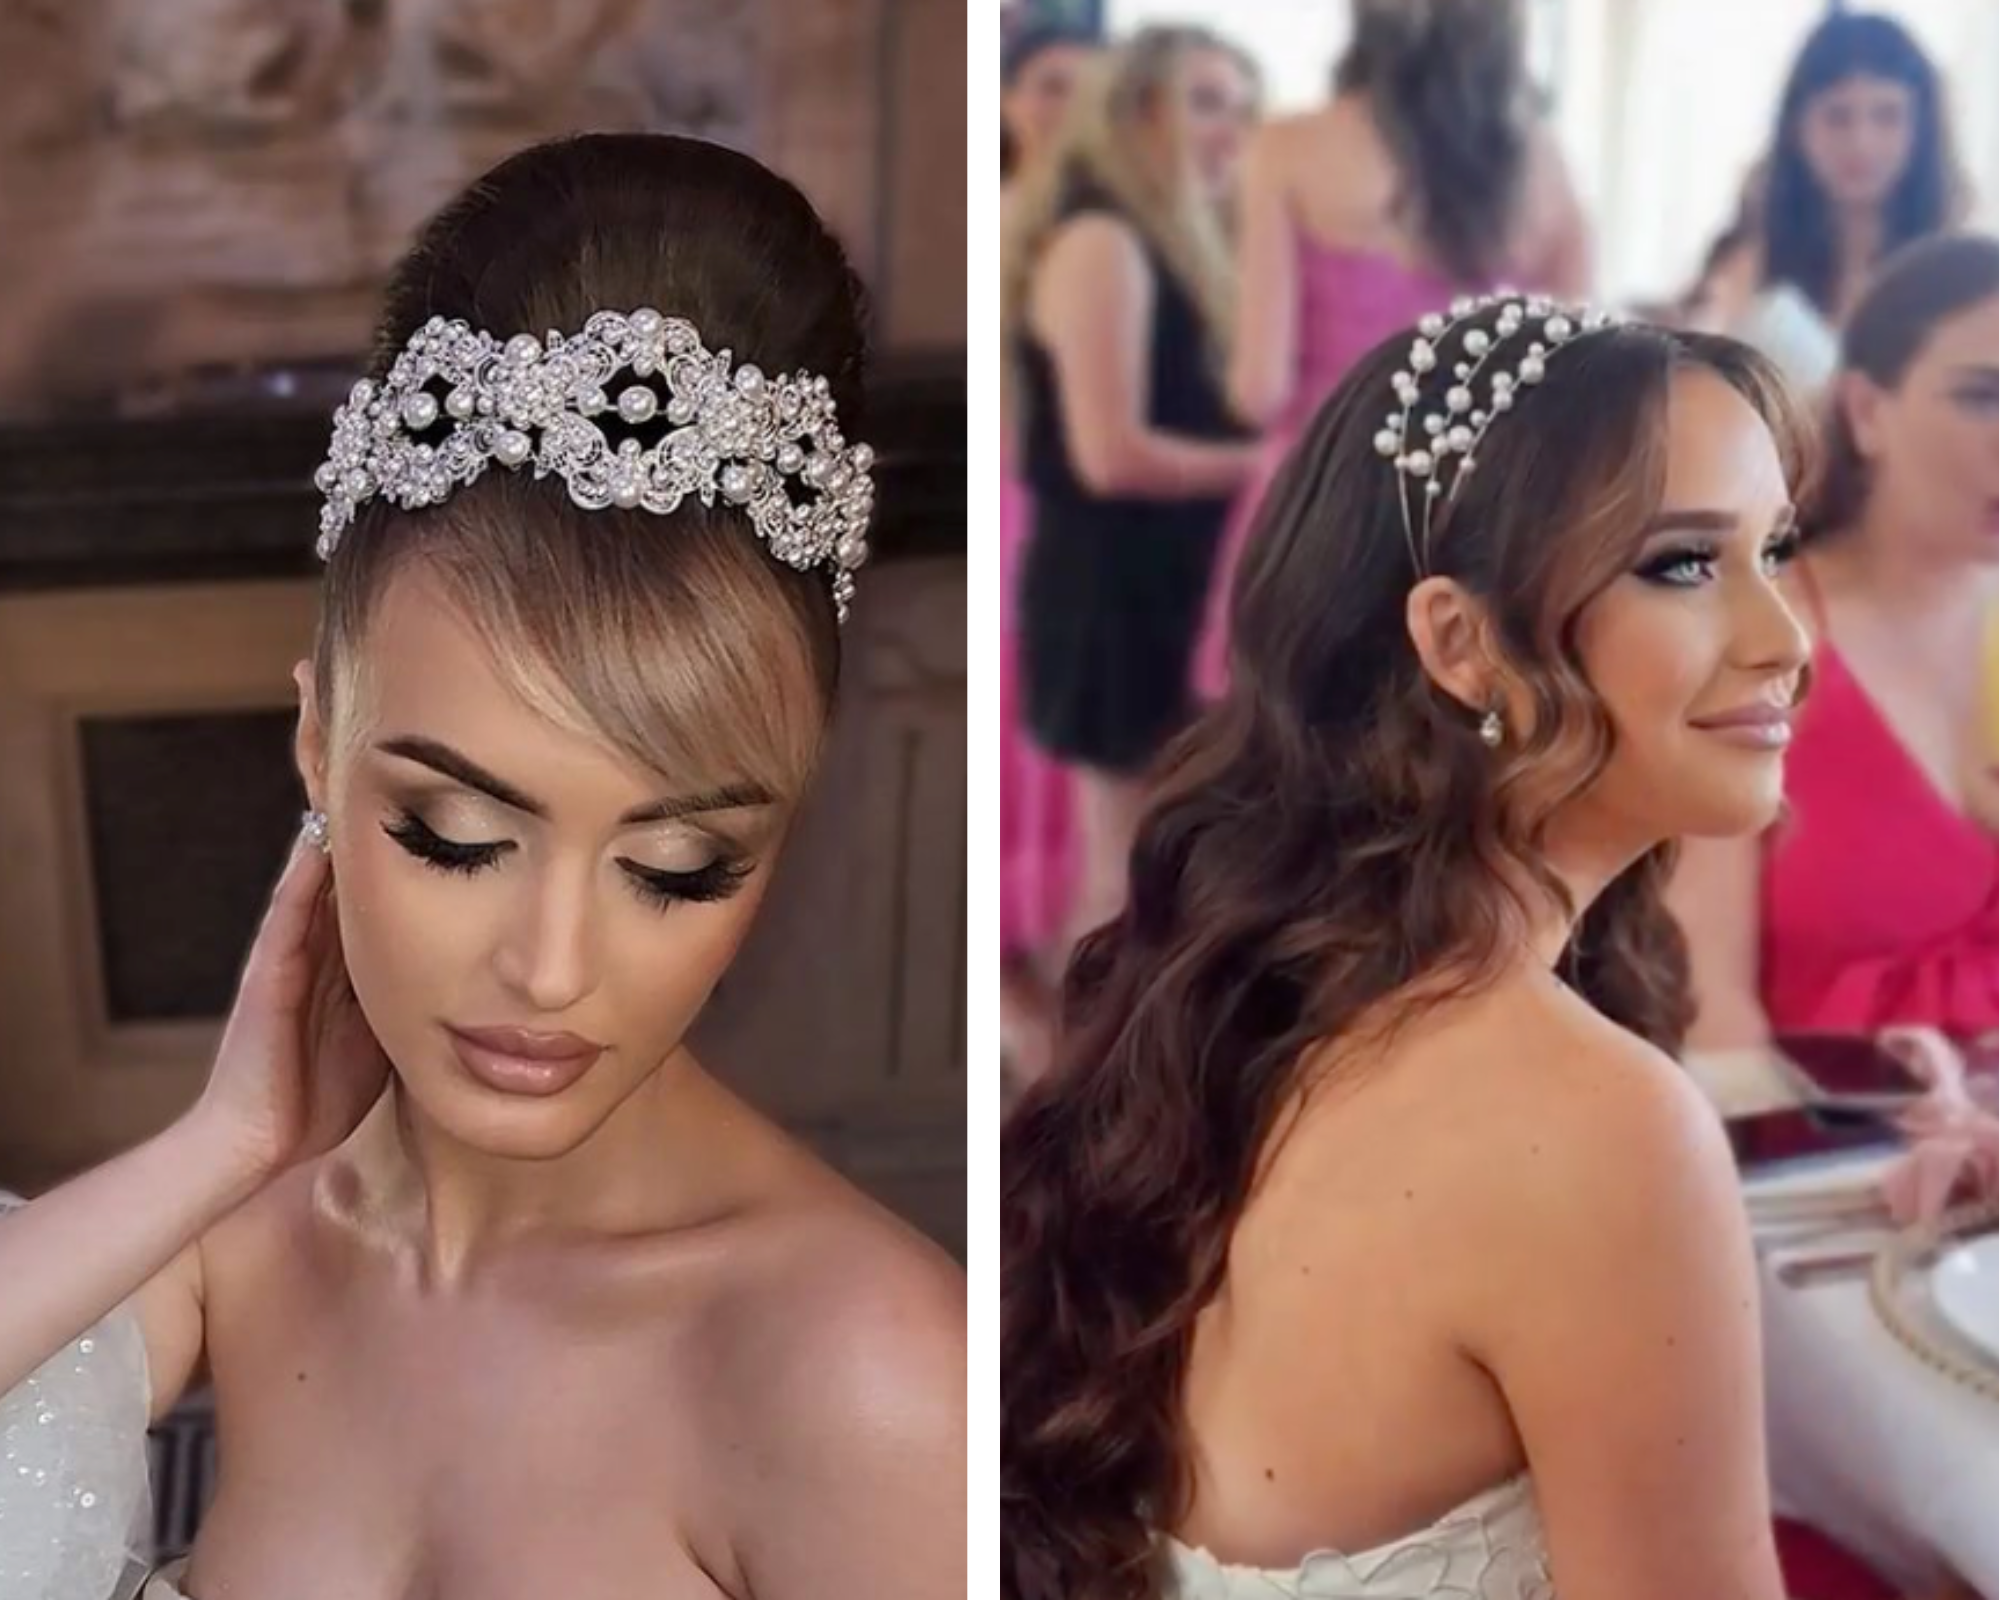 Two separate images of brides wearing pearl and crystal wedding headpiece with pearl bridal earrings